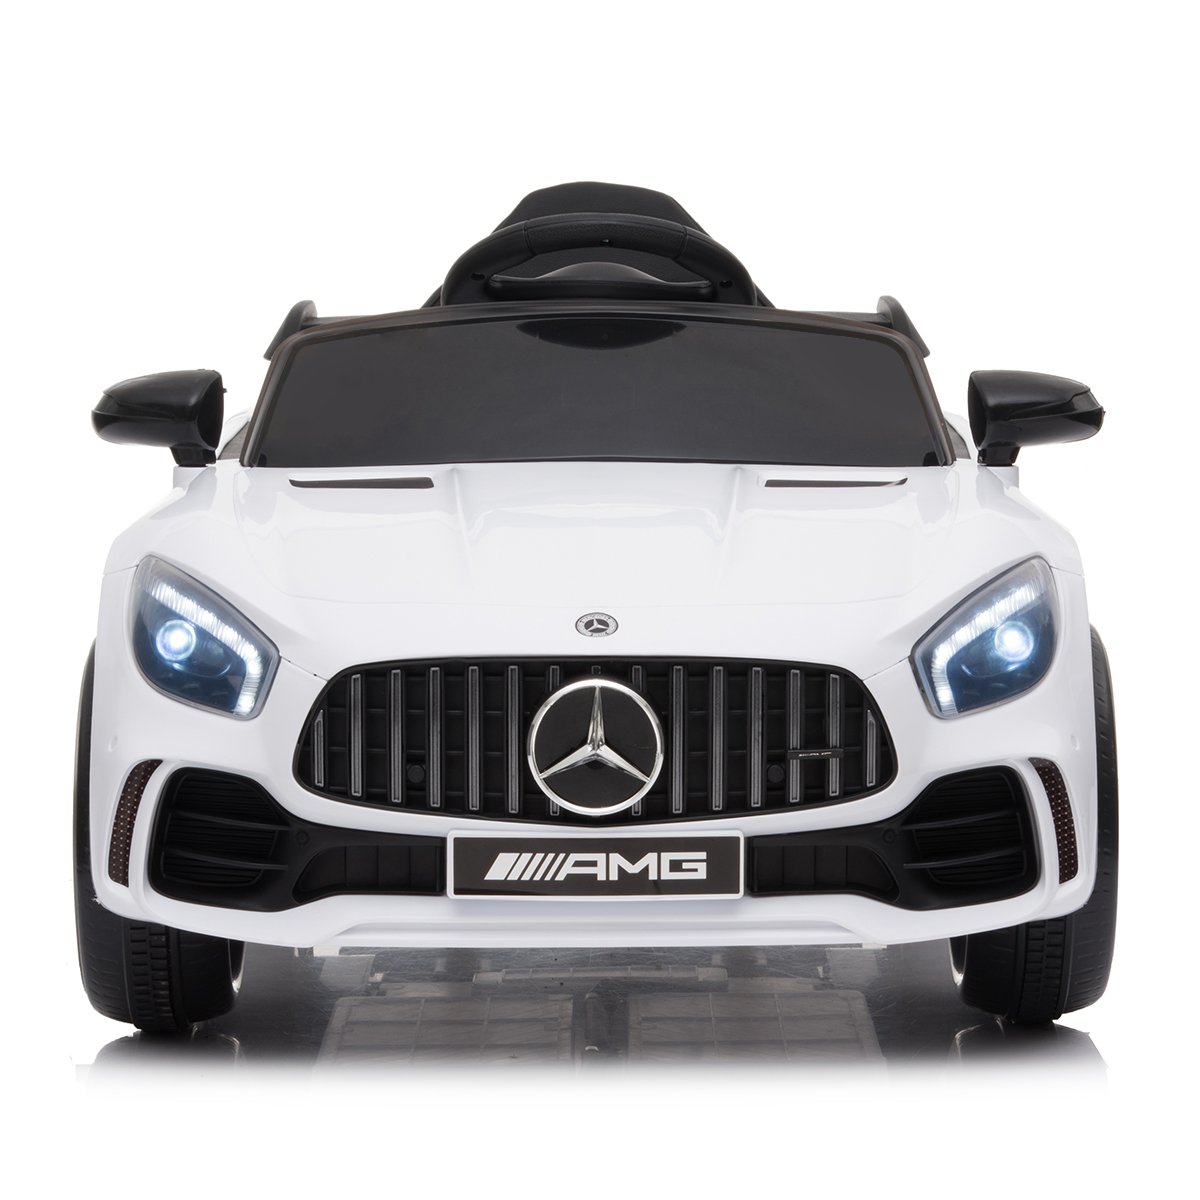 Kahuna Mercedes Benz Licensed Kids Electric Ride On Car Remote Control - White